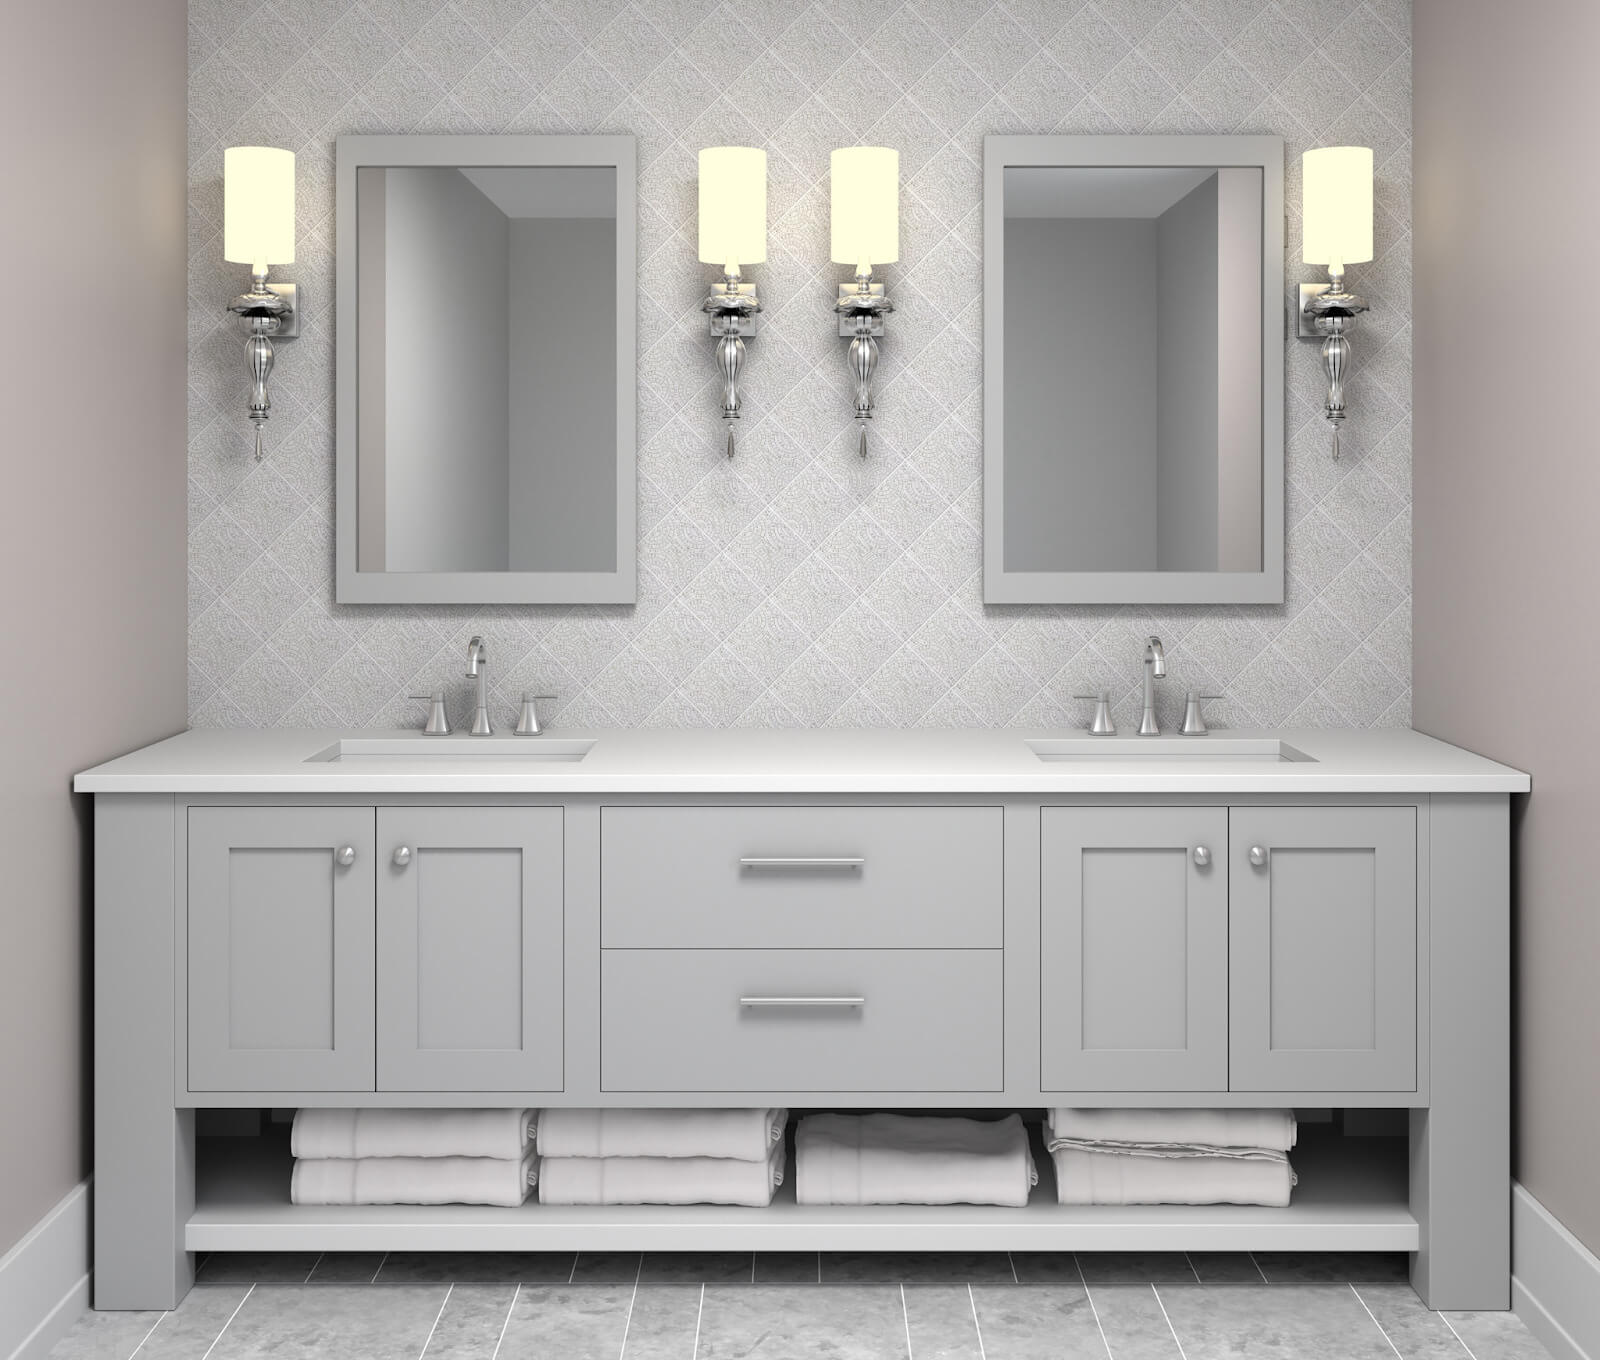 diagonally laid gray tile with a subtle pattern